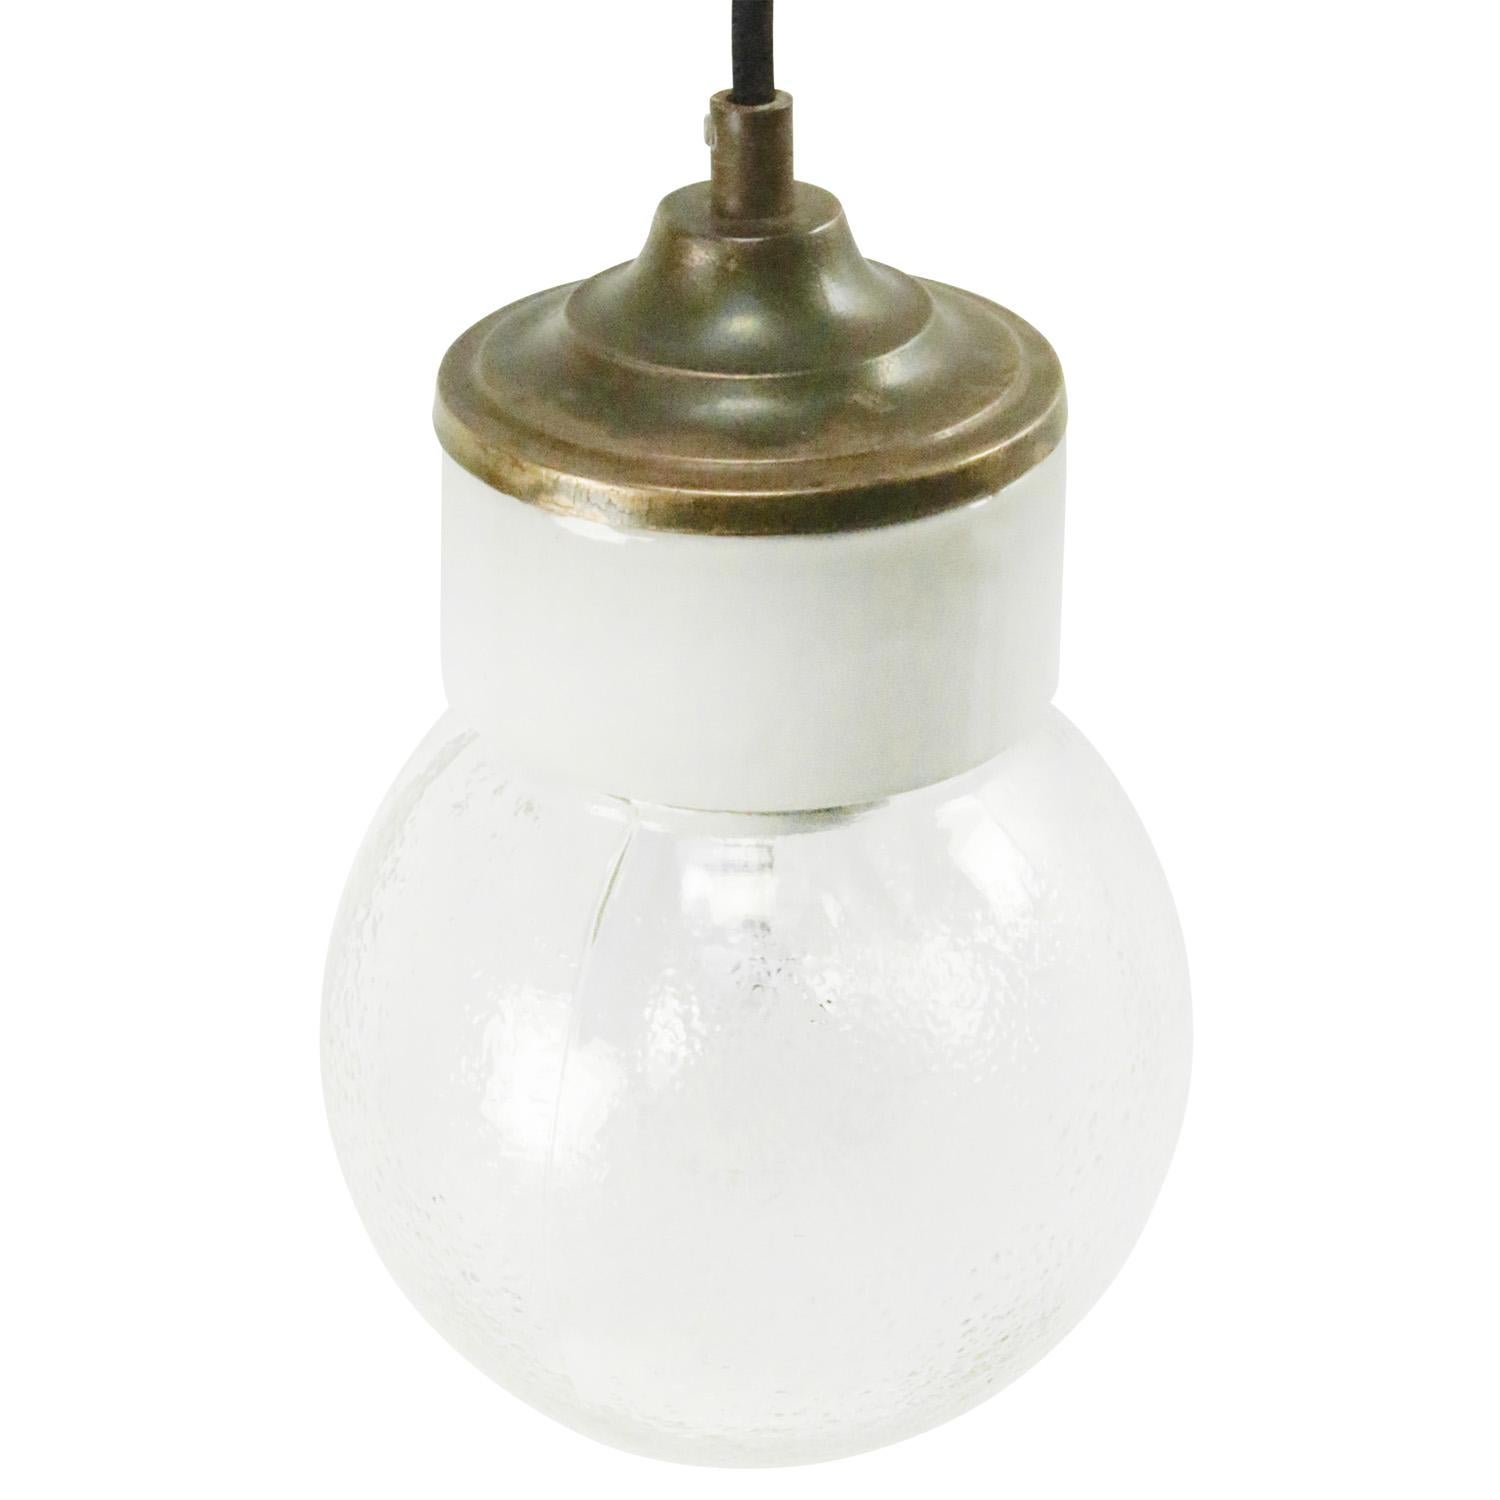 Porcelain industrial hanging lamp.
White porcelain, brass and clear textured glass.
2 conductors, no ground.

Weight: 1.40 kg / 3.1 lb

Priced per individual item. All lamps have been made suitable by international standards for incandescent